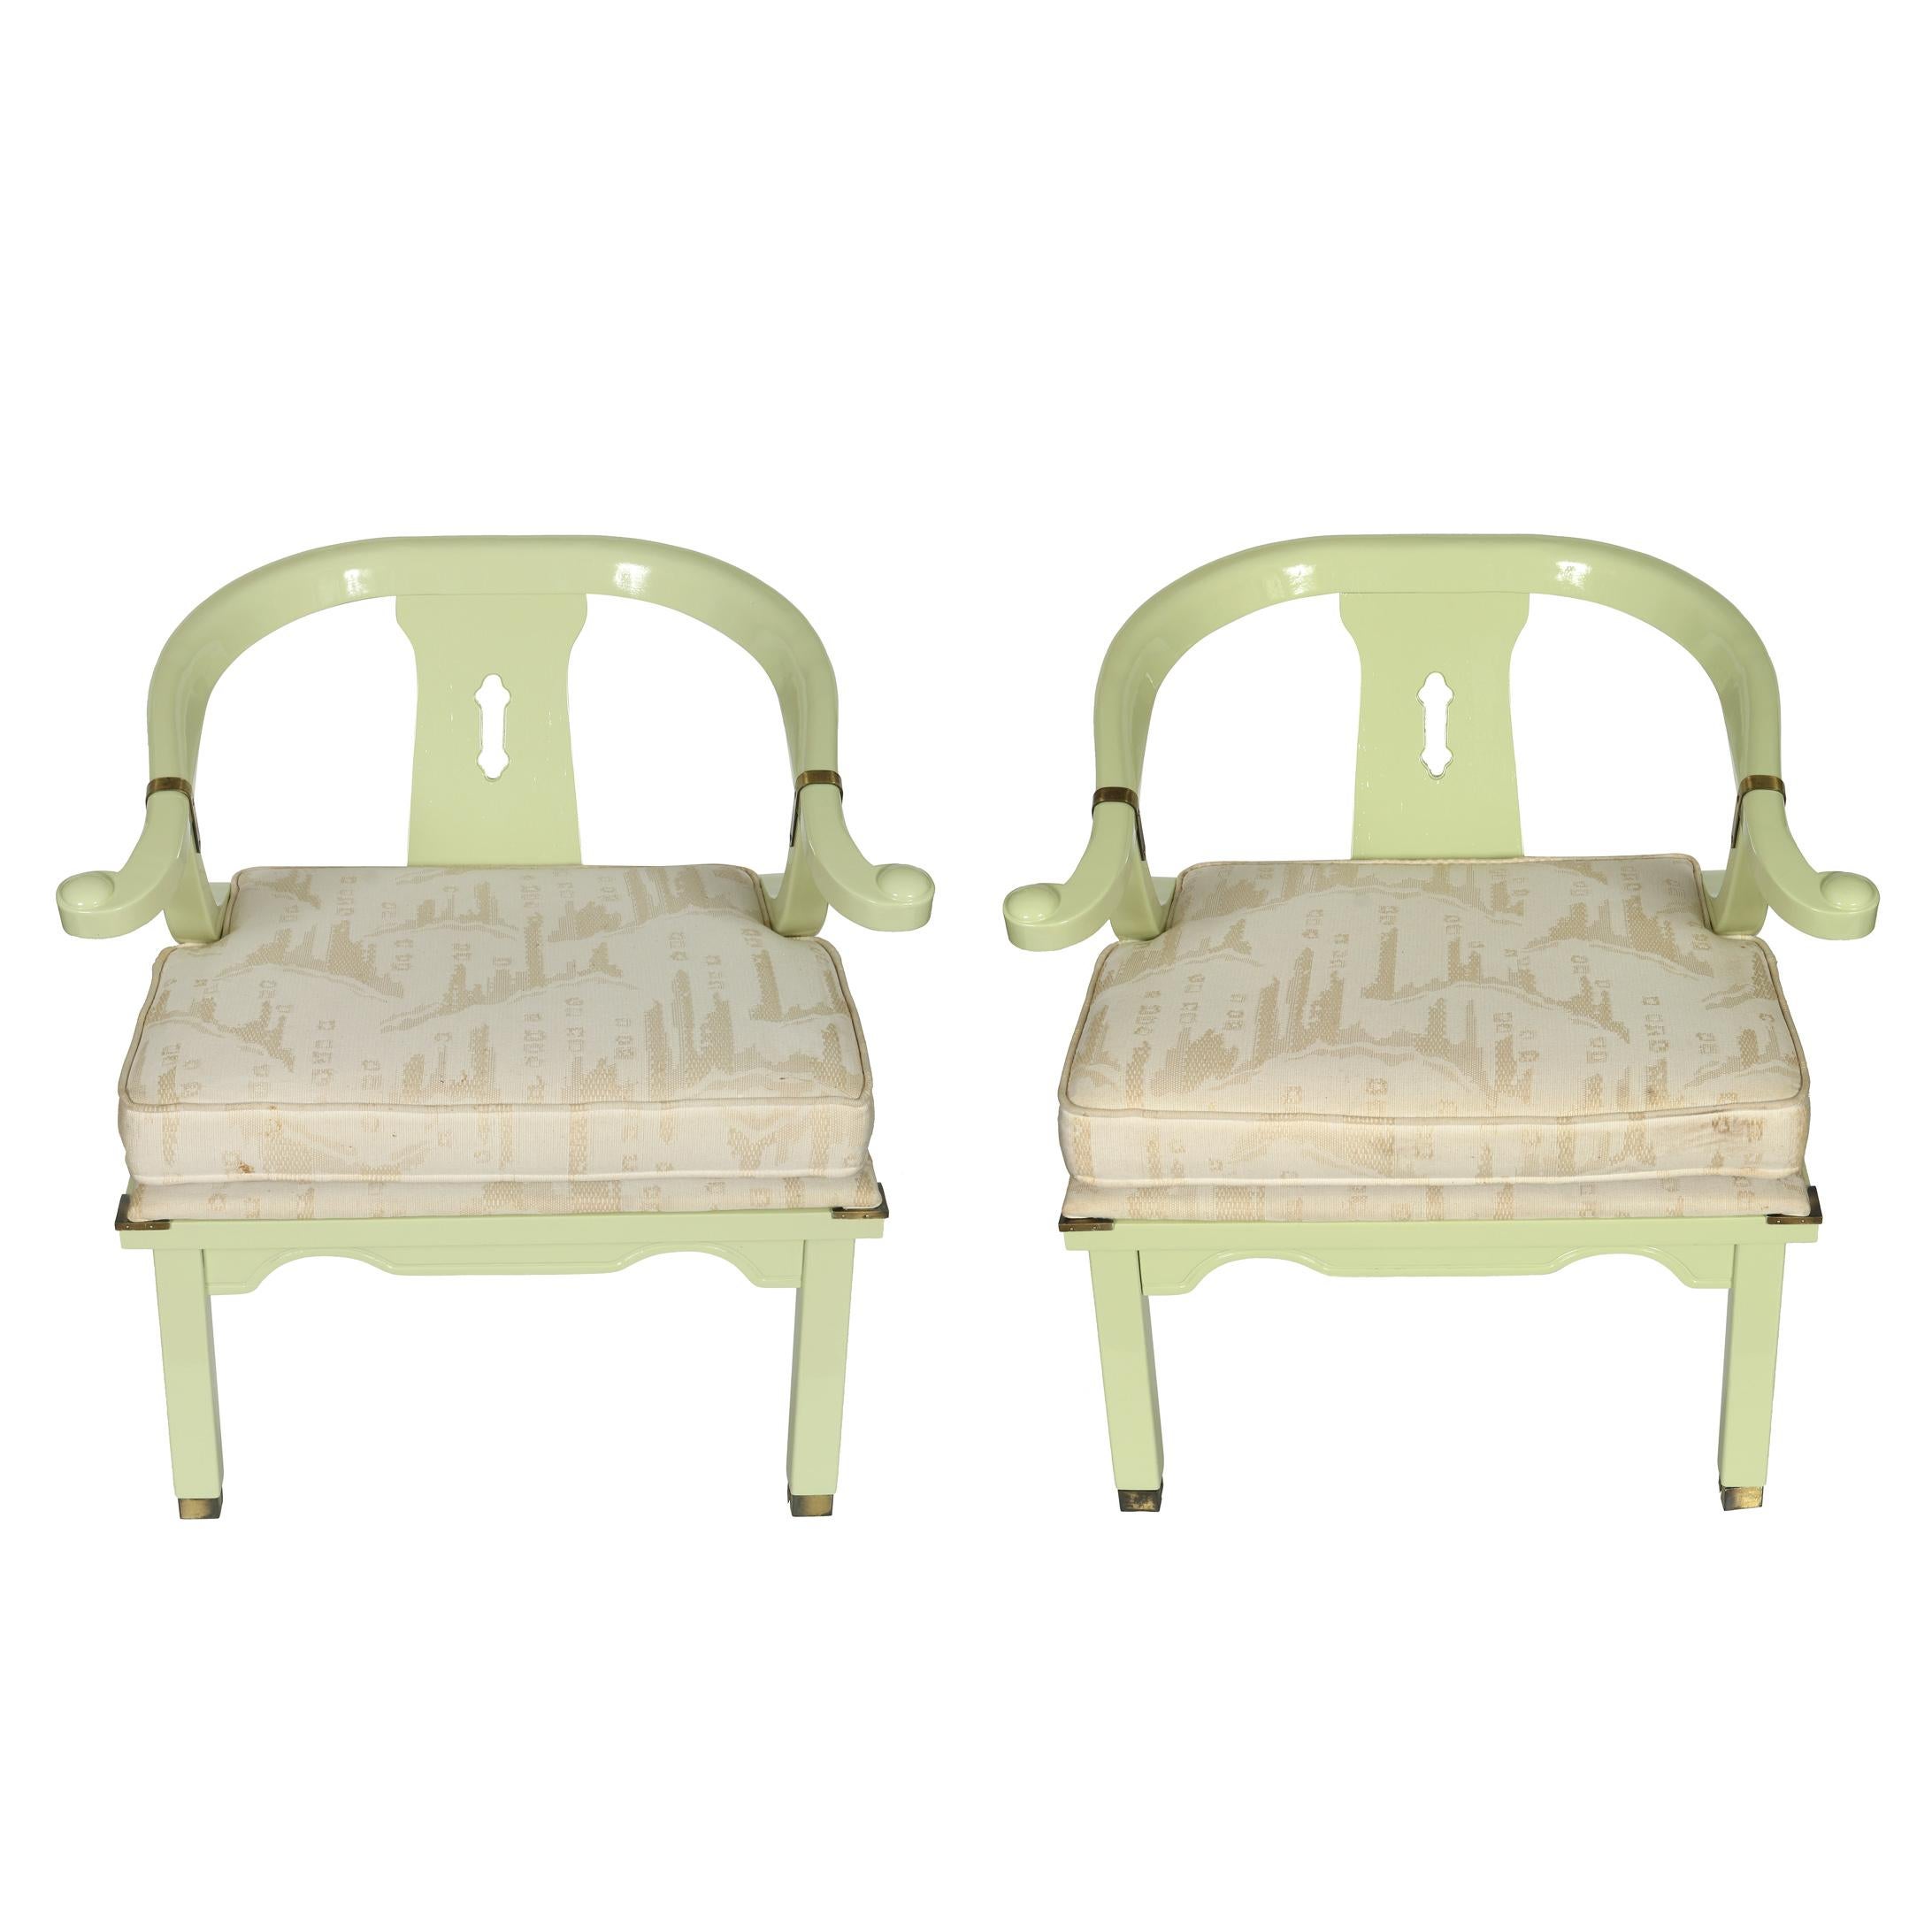 Celadon lacquered, midcentury, James Mont style Ming chairs with brass accents.